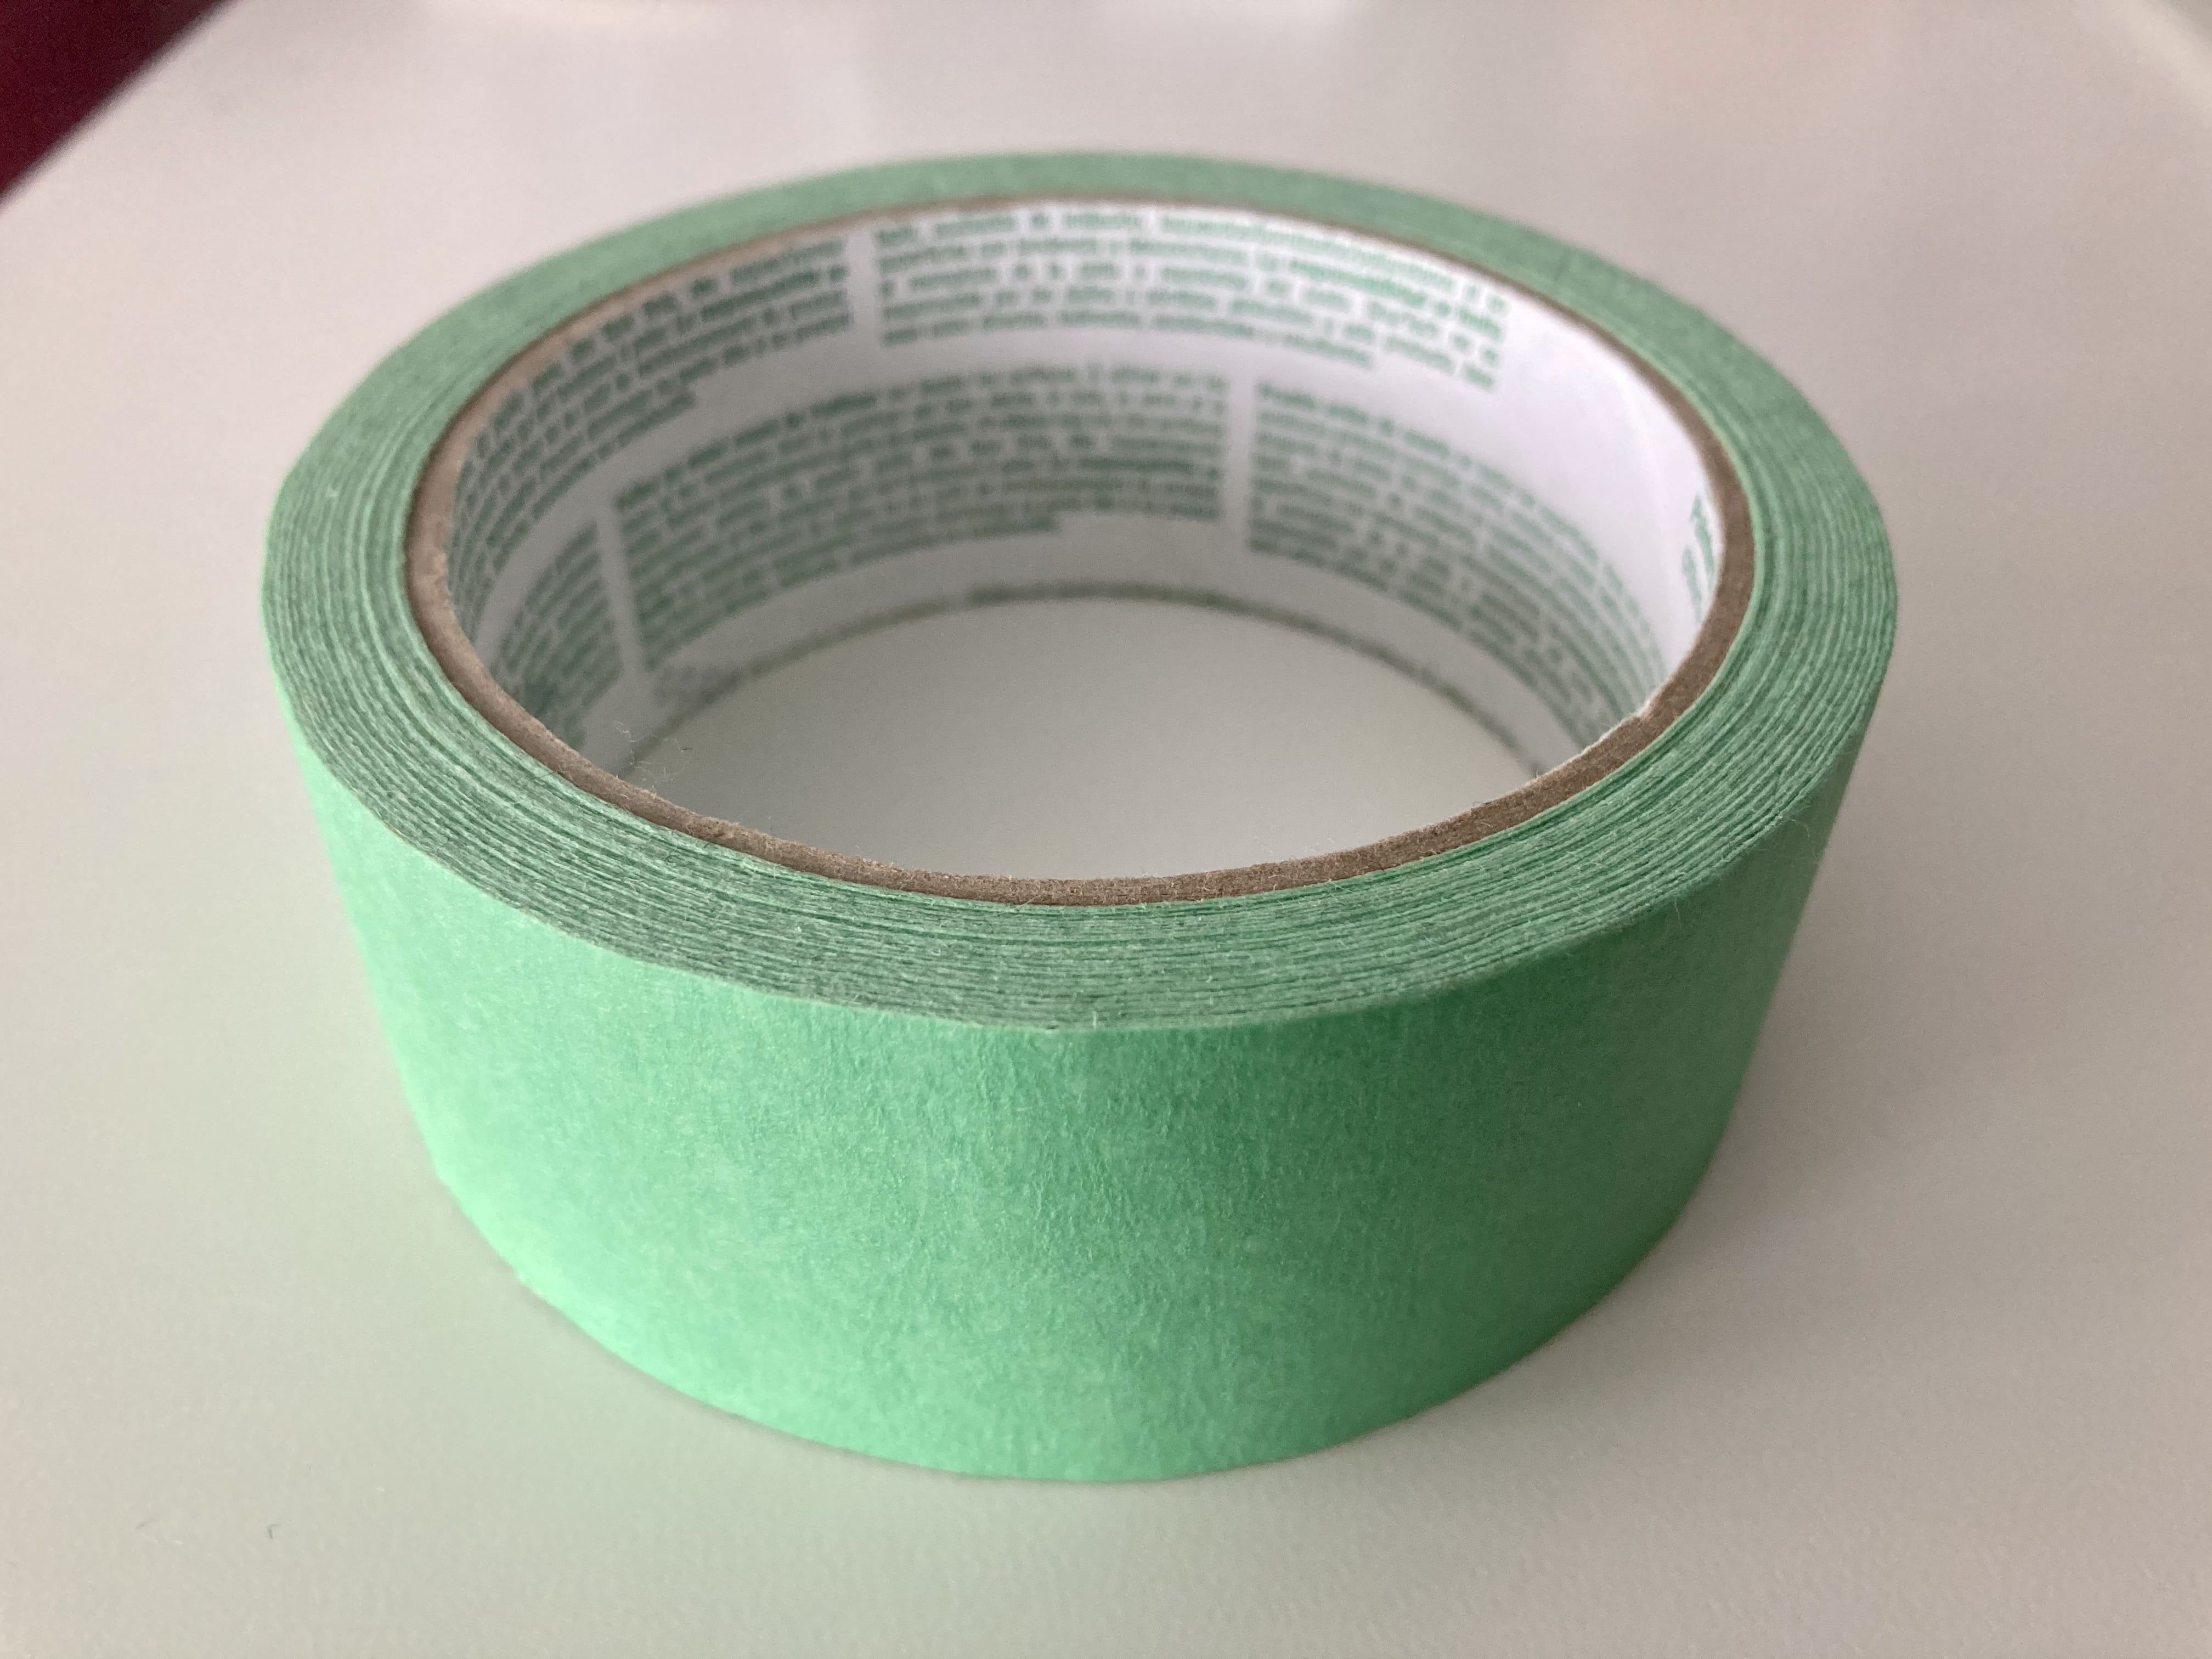 2 GREEN PAINTERS TAPE (qty of 1 or 6 rolls)